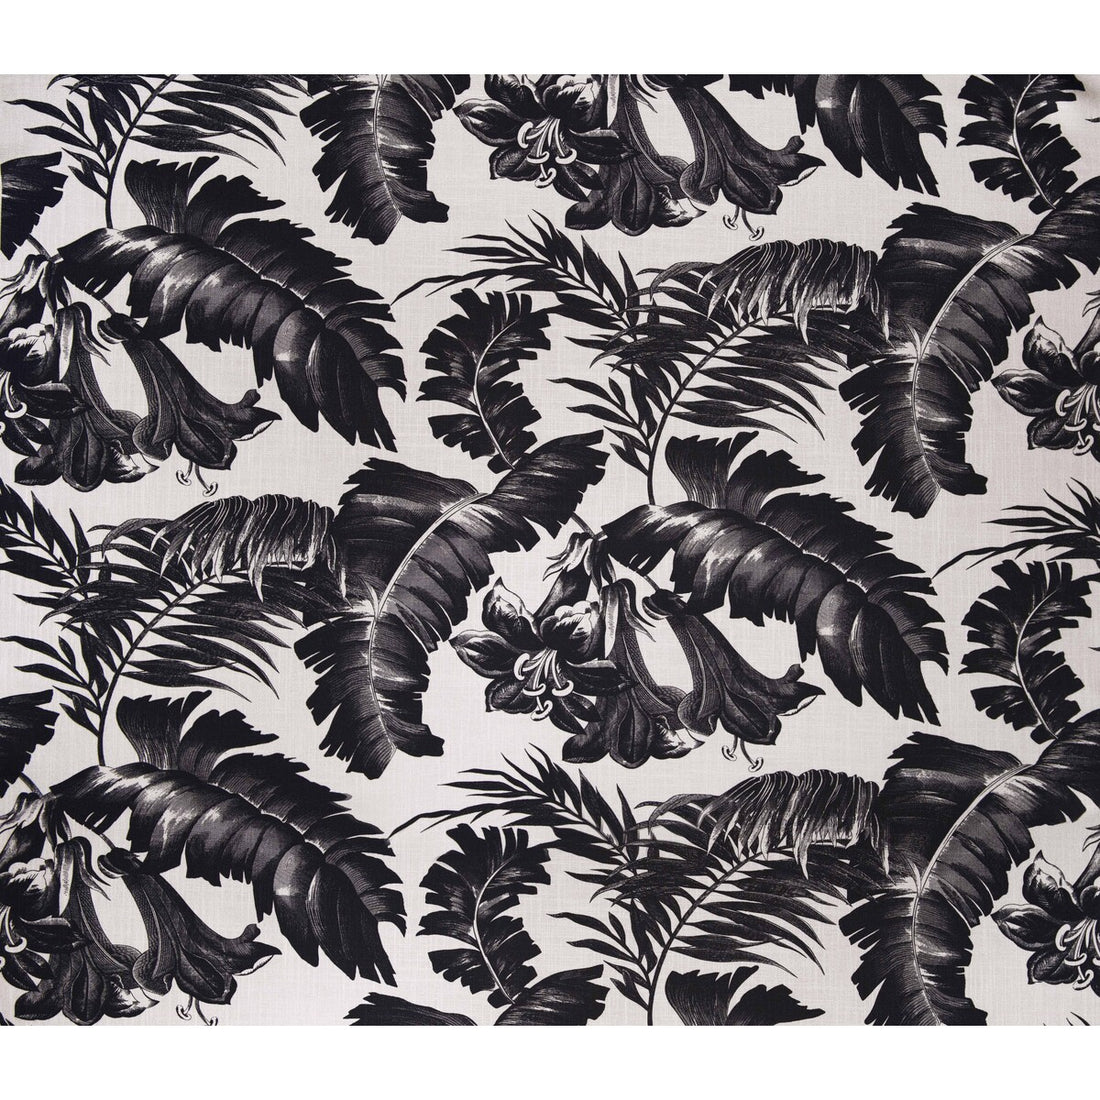 Plantation fabric in black color - pattern GDT5401.6.0 - by Gaston y Daniela in the Gaston Africalia collection